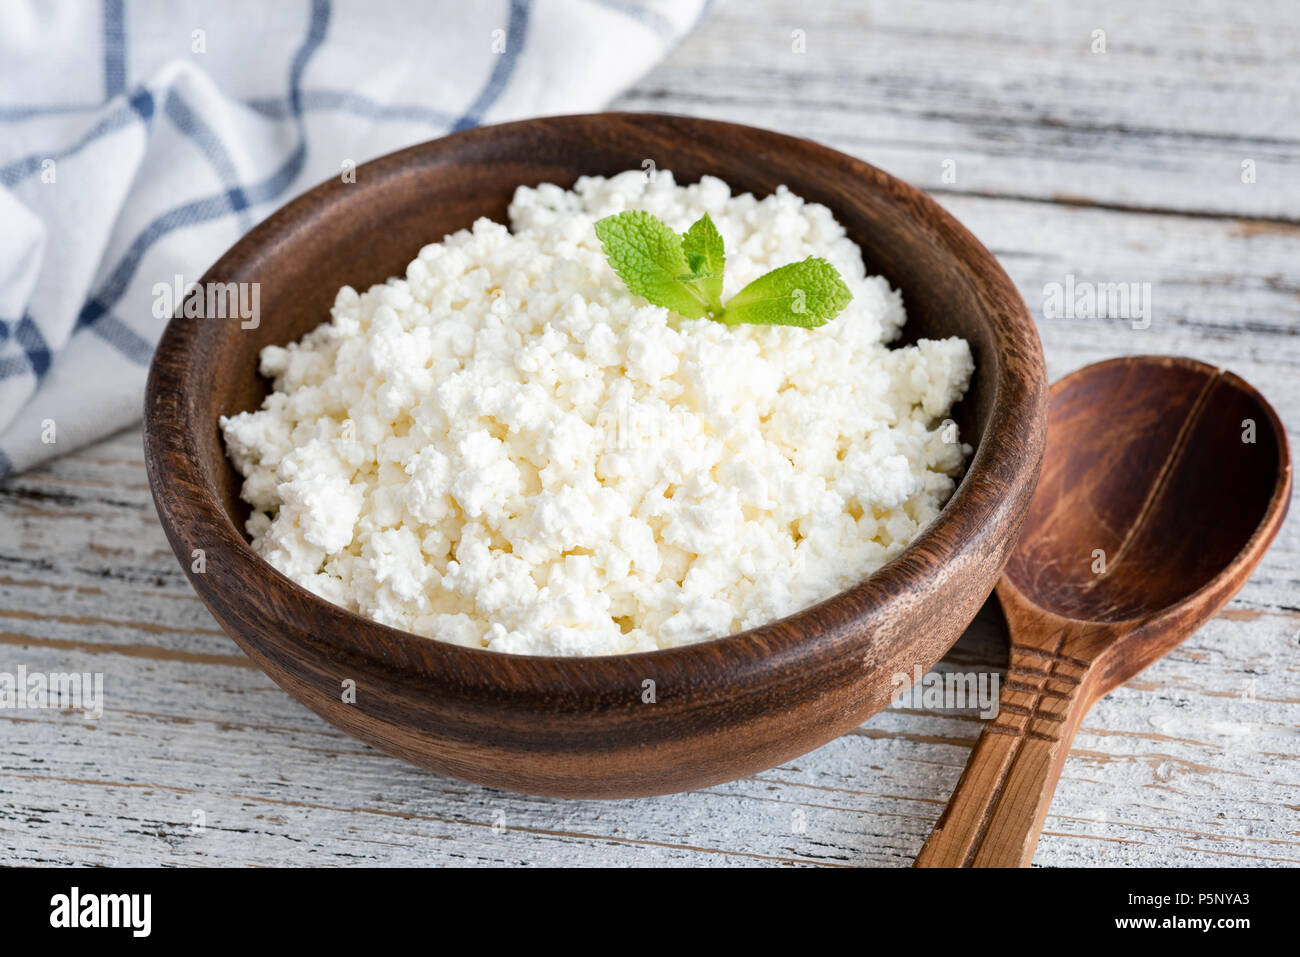 Cottage Cheese Ricotta Or Tvorog In Wooden Bowl On White Table